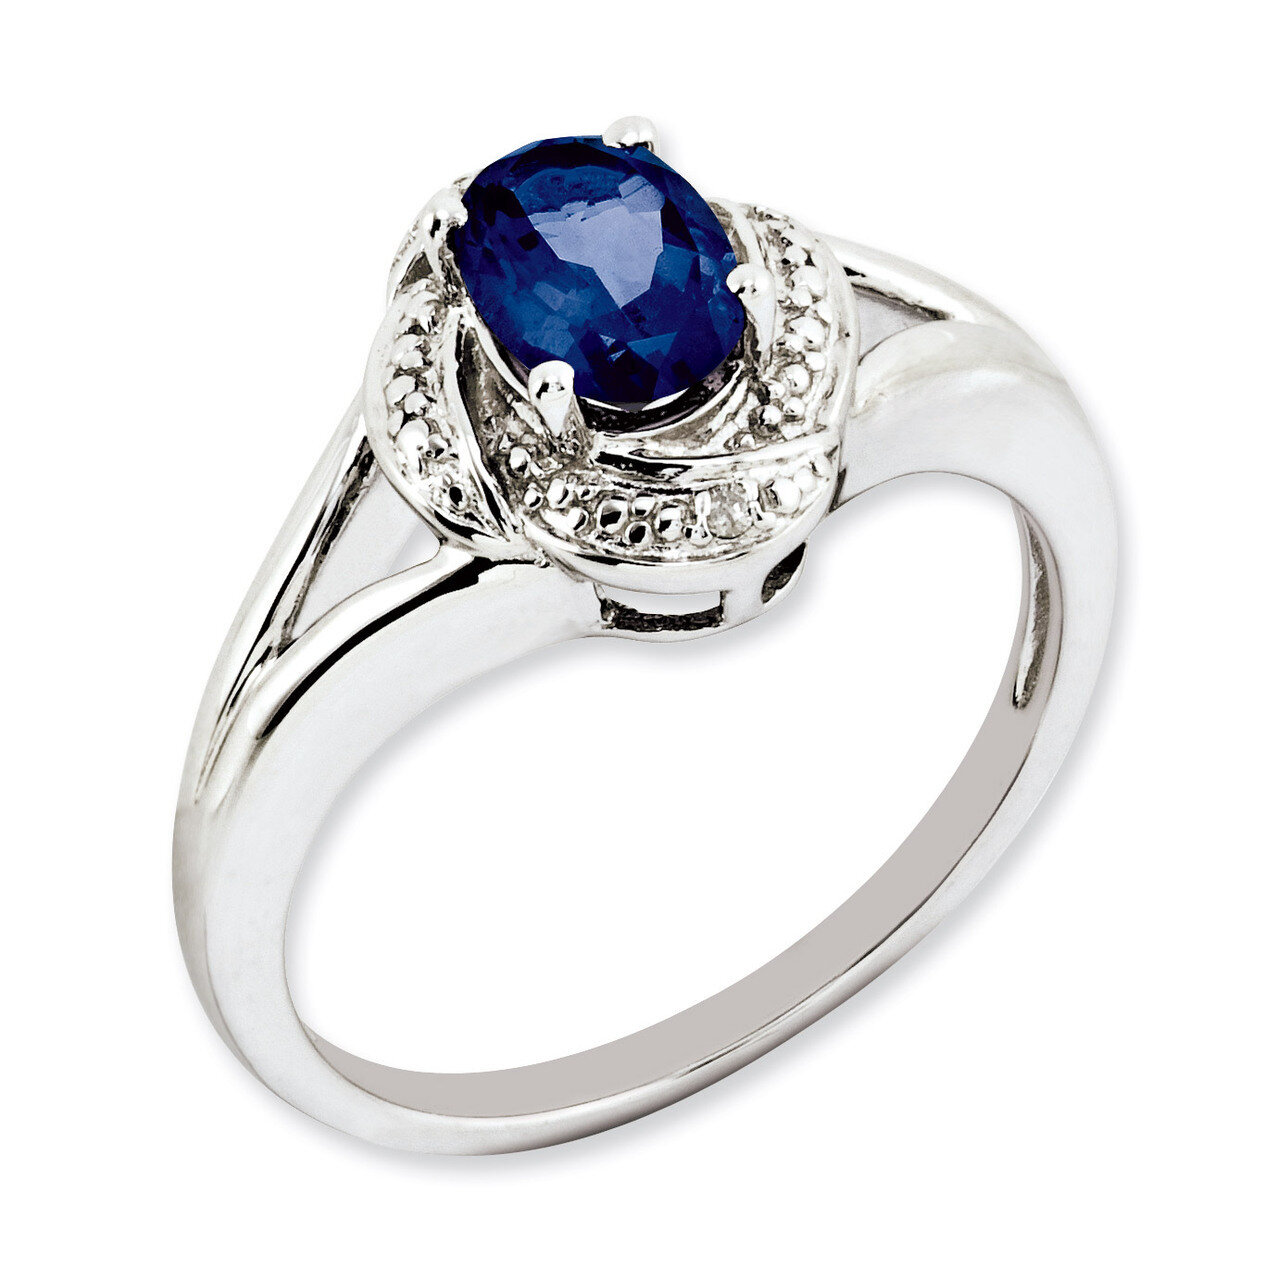 September Created Sapphire Ring Sterling Silver Diamond QBR12SEP